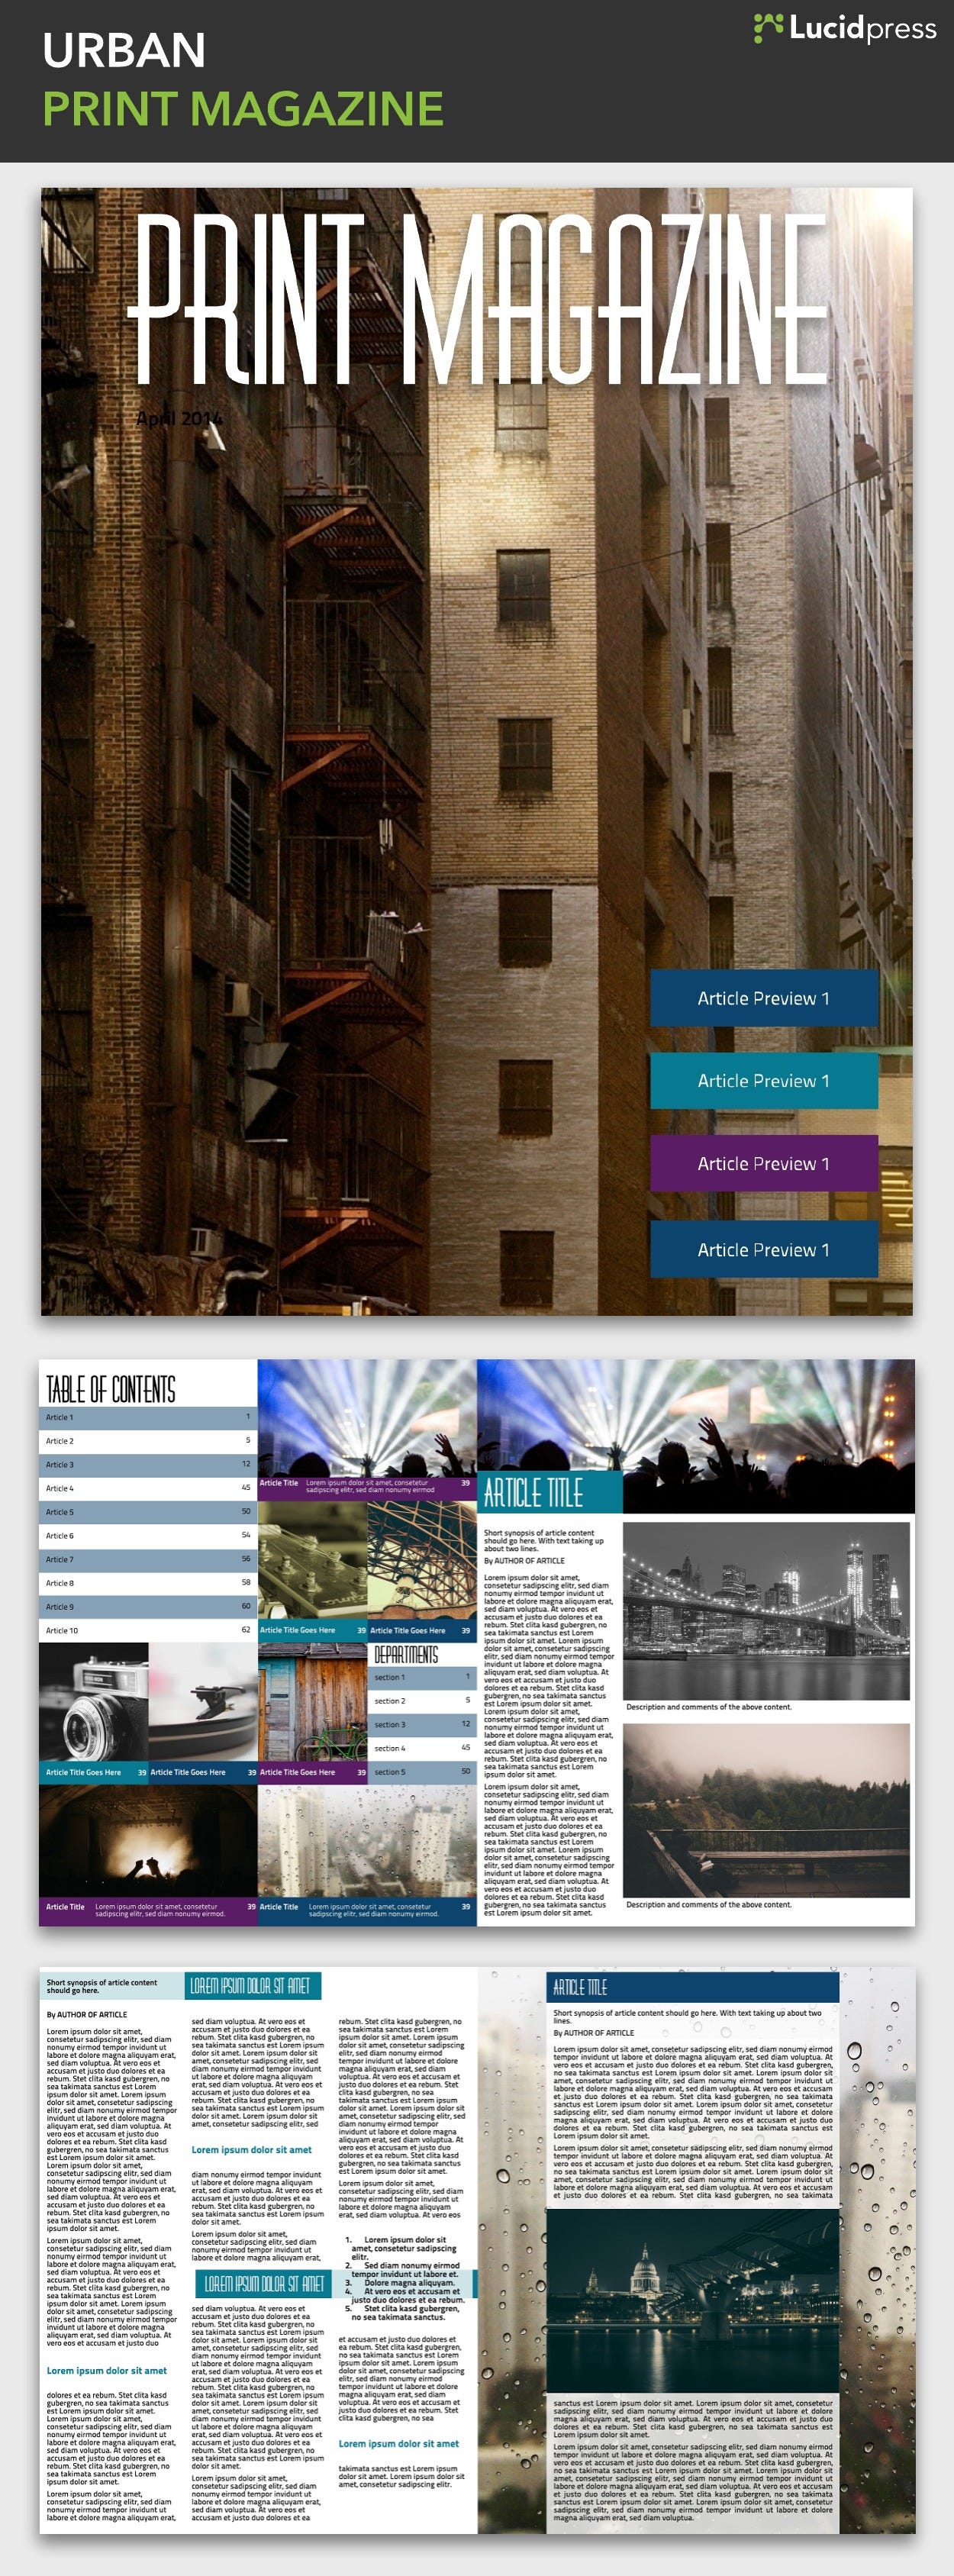 14 Magazine Layout Design Ideas For Your Inspiration By Lucidpress Lucidpress Medium